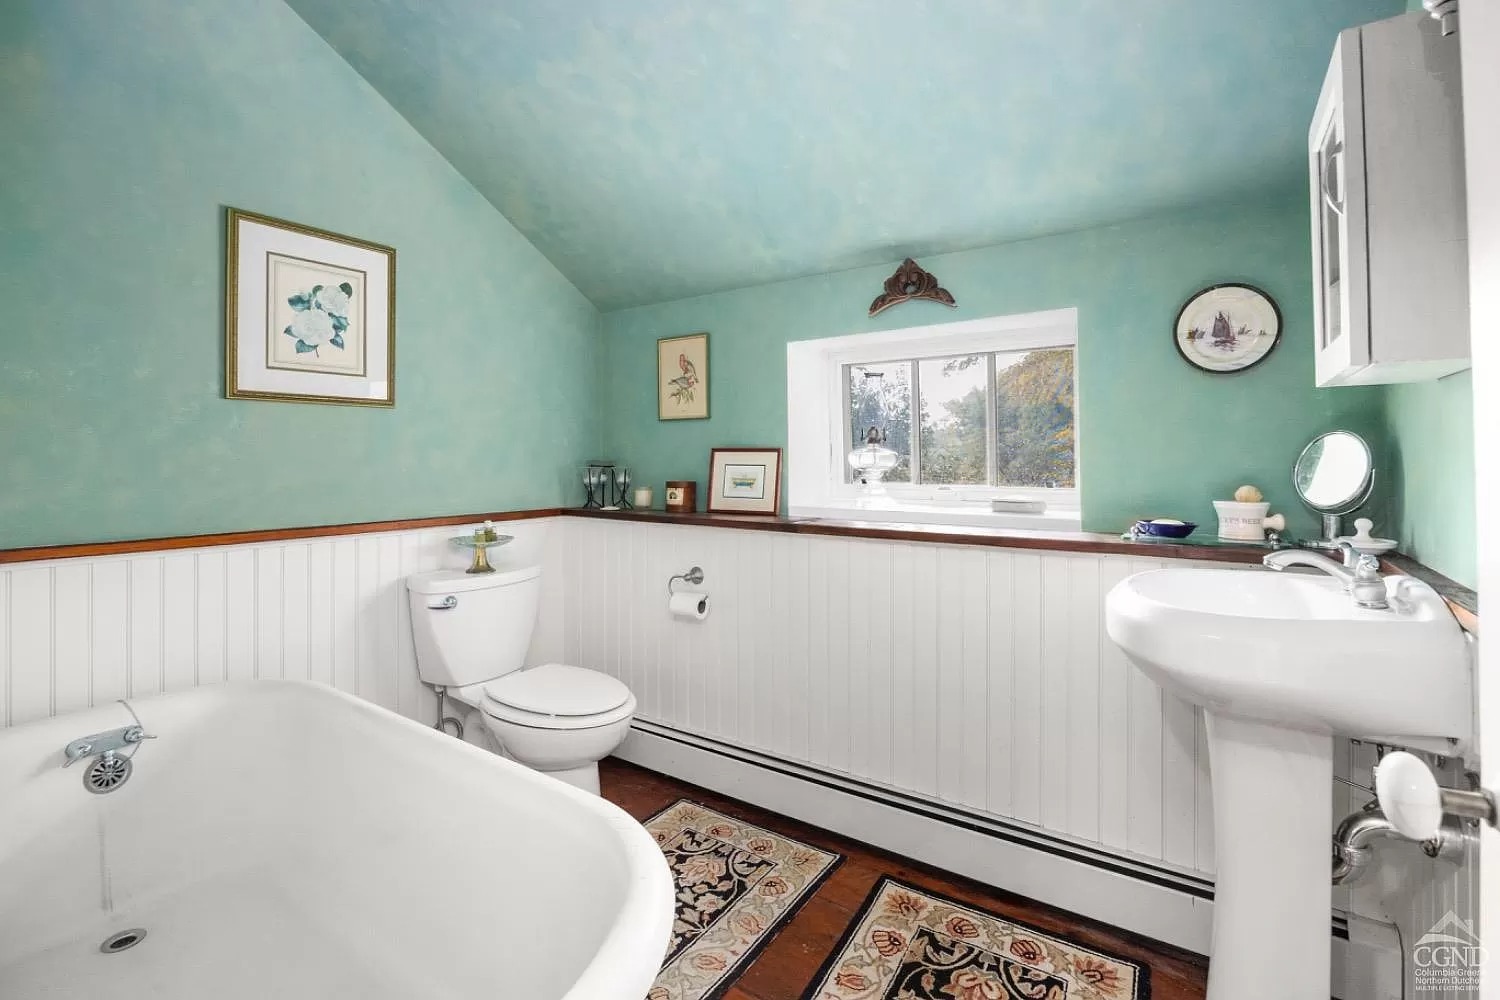 Full bath with sponge-painted walls and ceiling